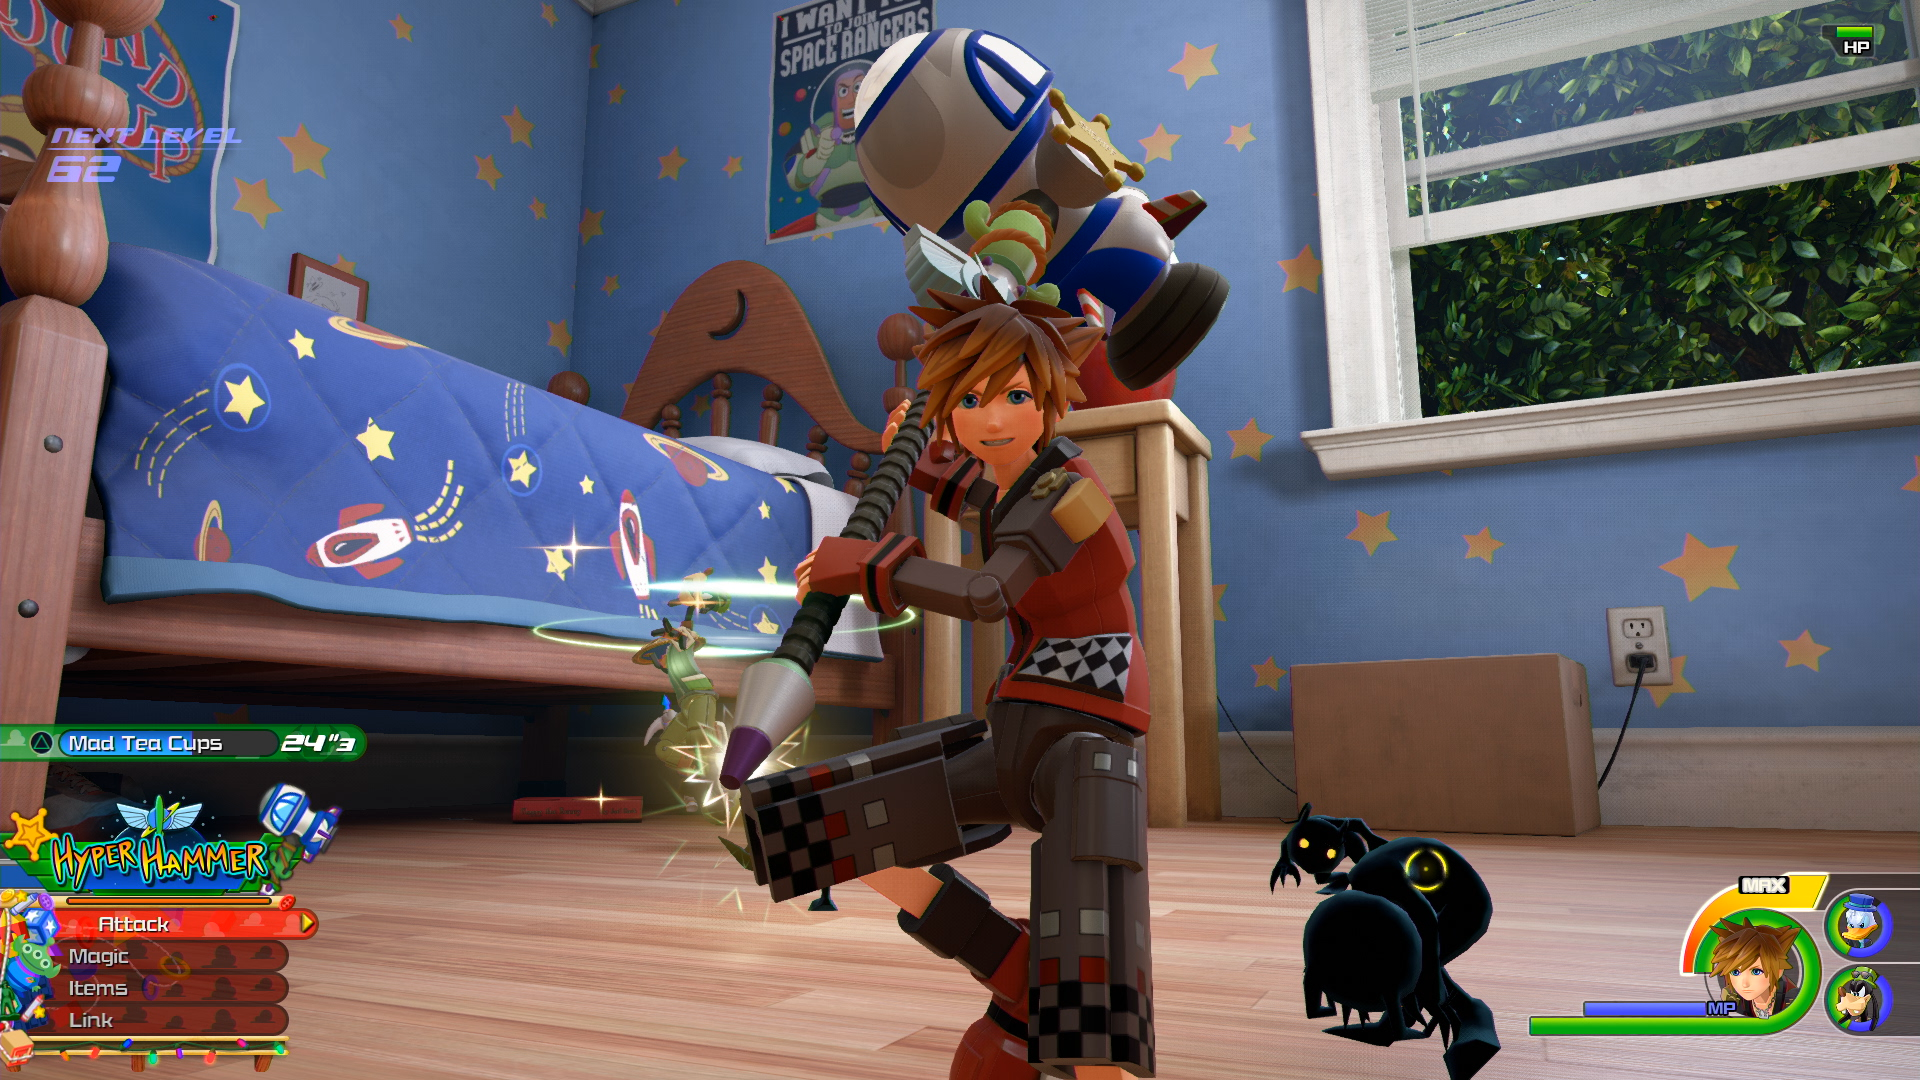 Hands On With Kingdom Hearts 3, Finally